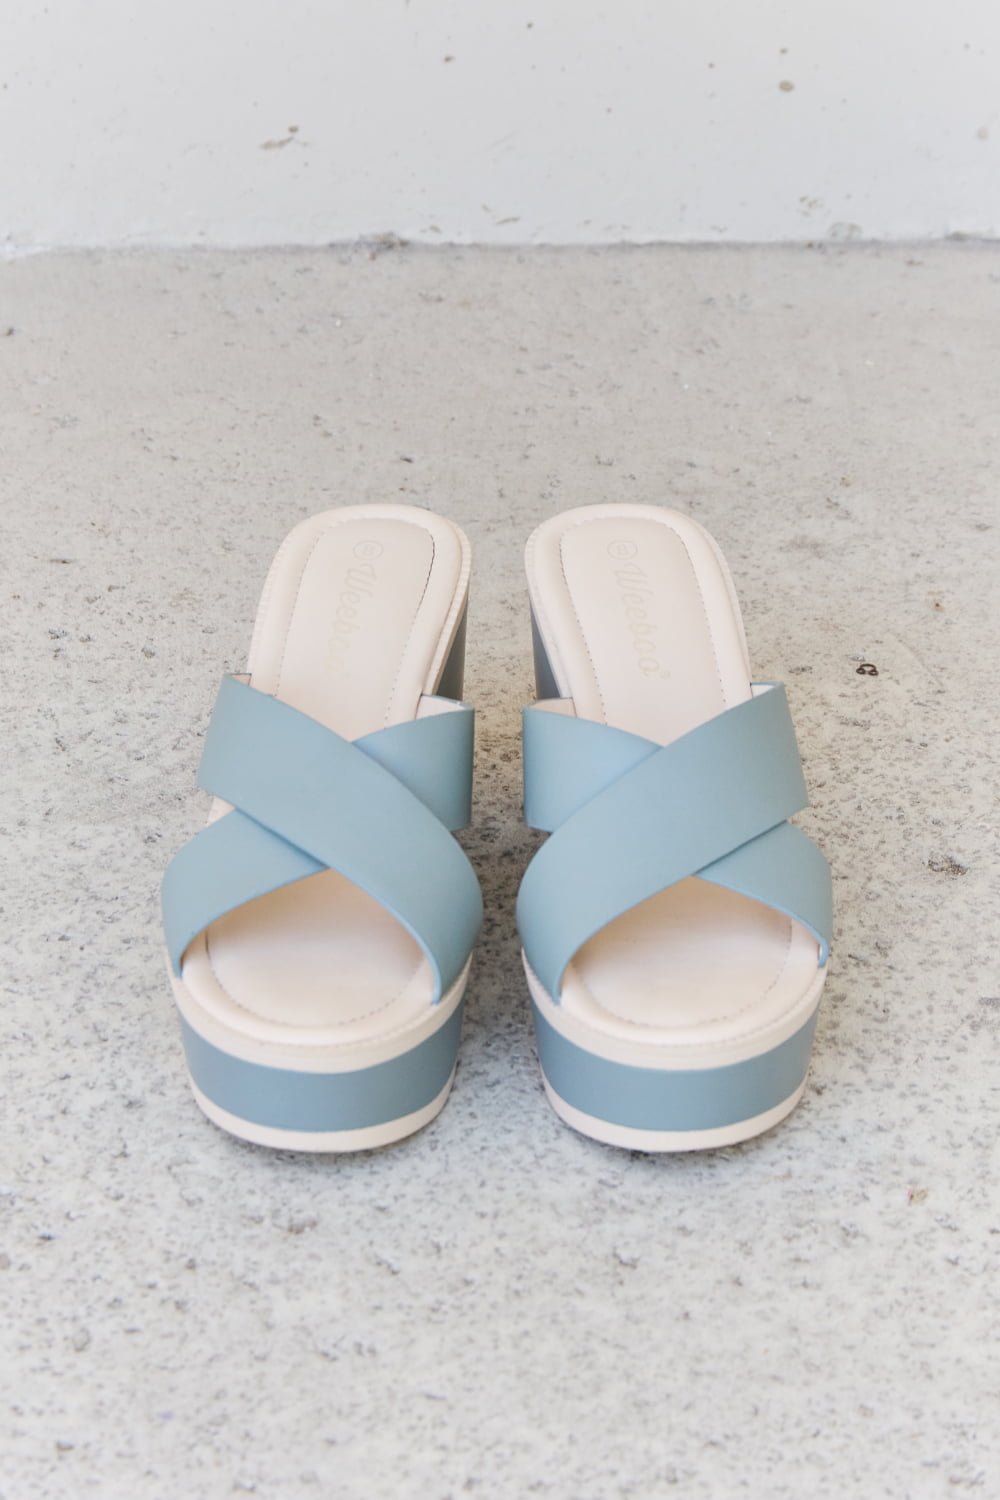 Weeboo Cherish The Moments Contrast Platform Sandals in Misty Blue - Guy Christopher 